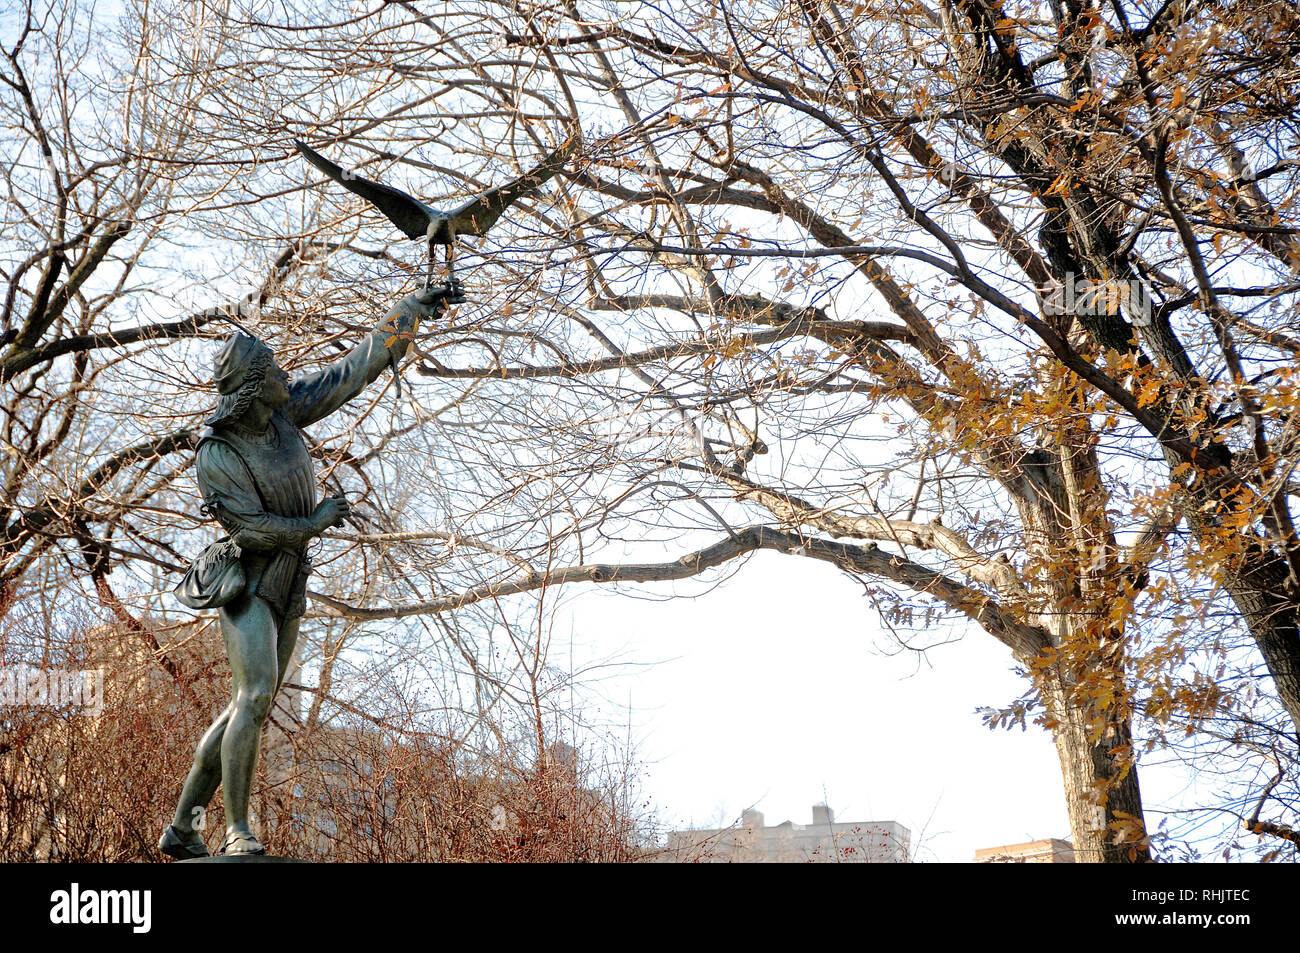 A cast iron sculpture called "The Falconer" is one of the public art pieces in New York City's Central Park. Stock Photo